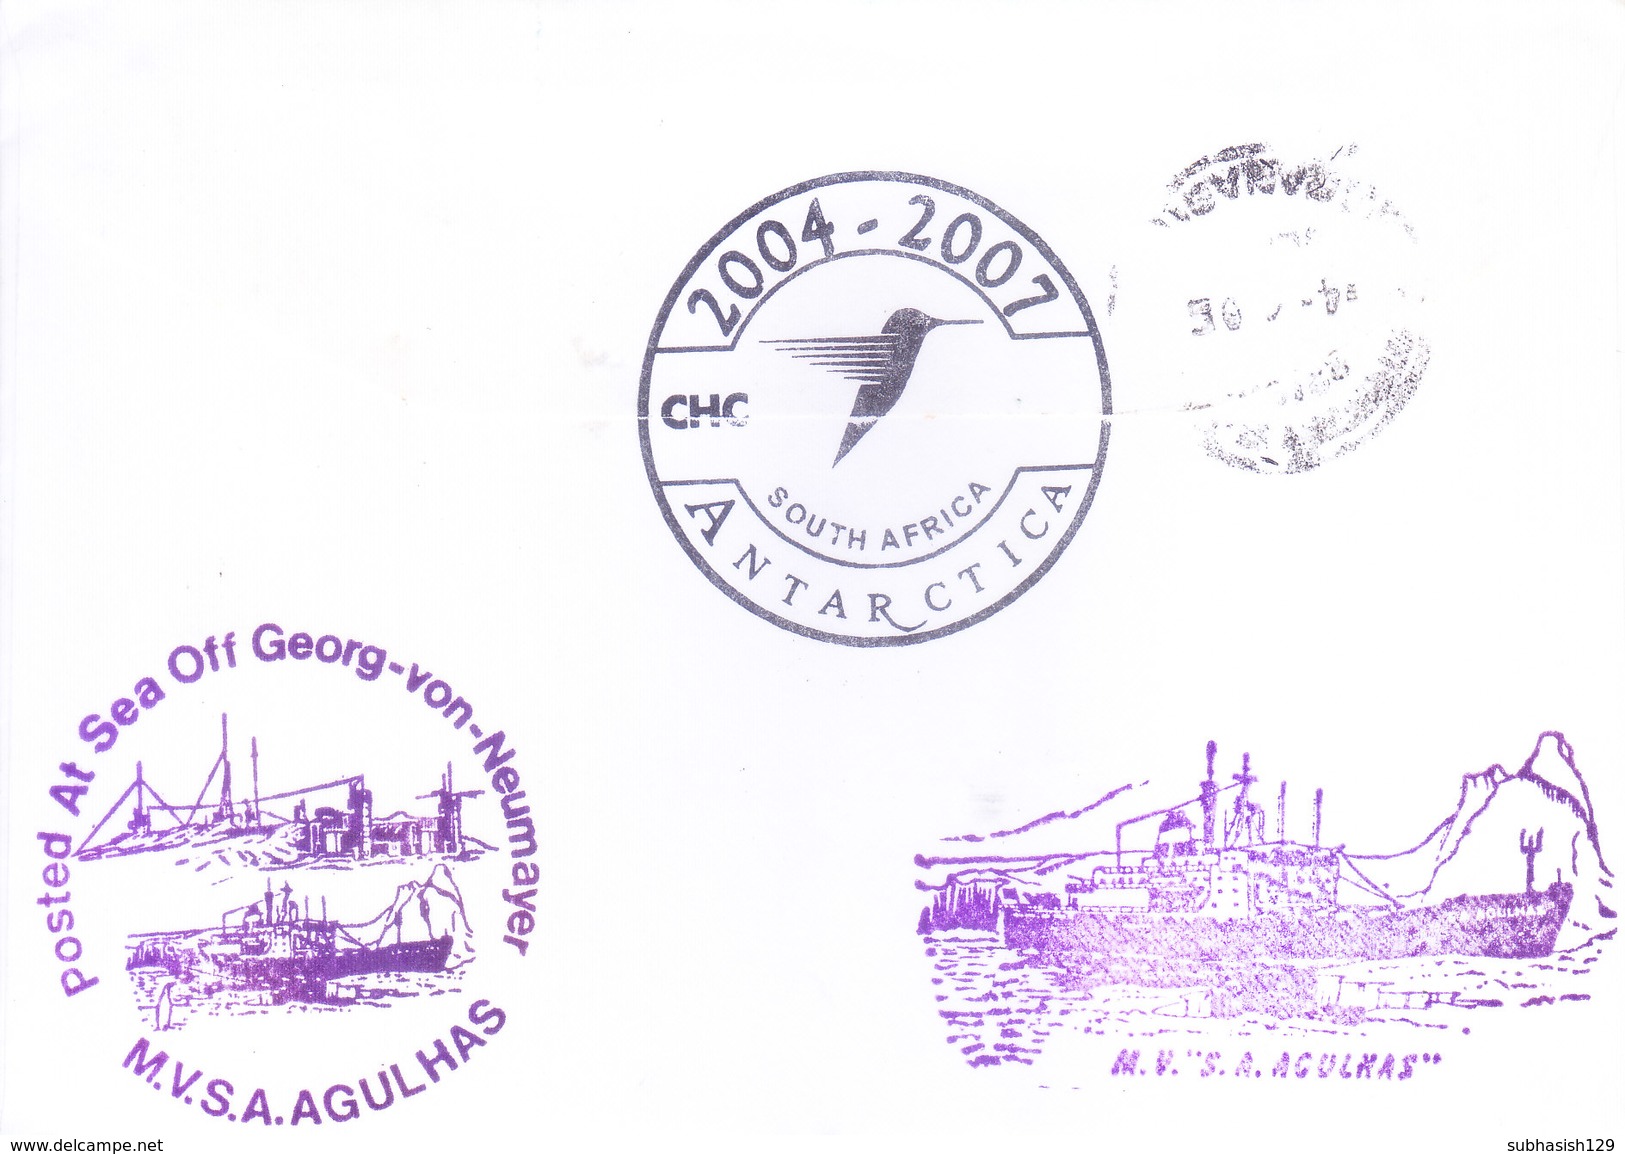 SOUTH AFRICA - ANTARCTIC EXPEDITION - 2005 - 44TH EXPEDITION, MV AGULHAS, SANAE CRUISE - COMMERCIALLY SENT TO INDIA - Lettres & Documents